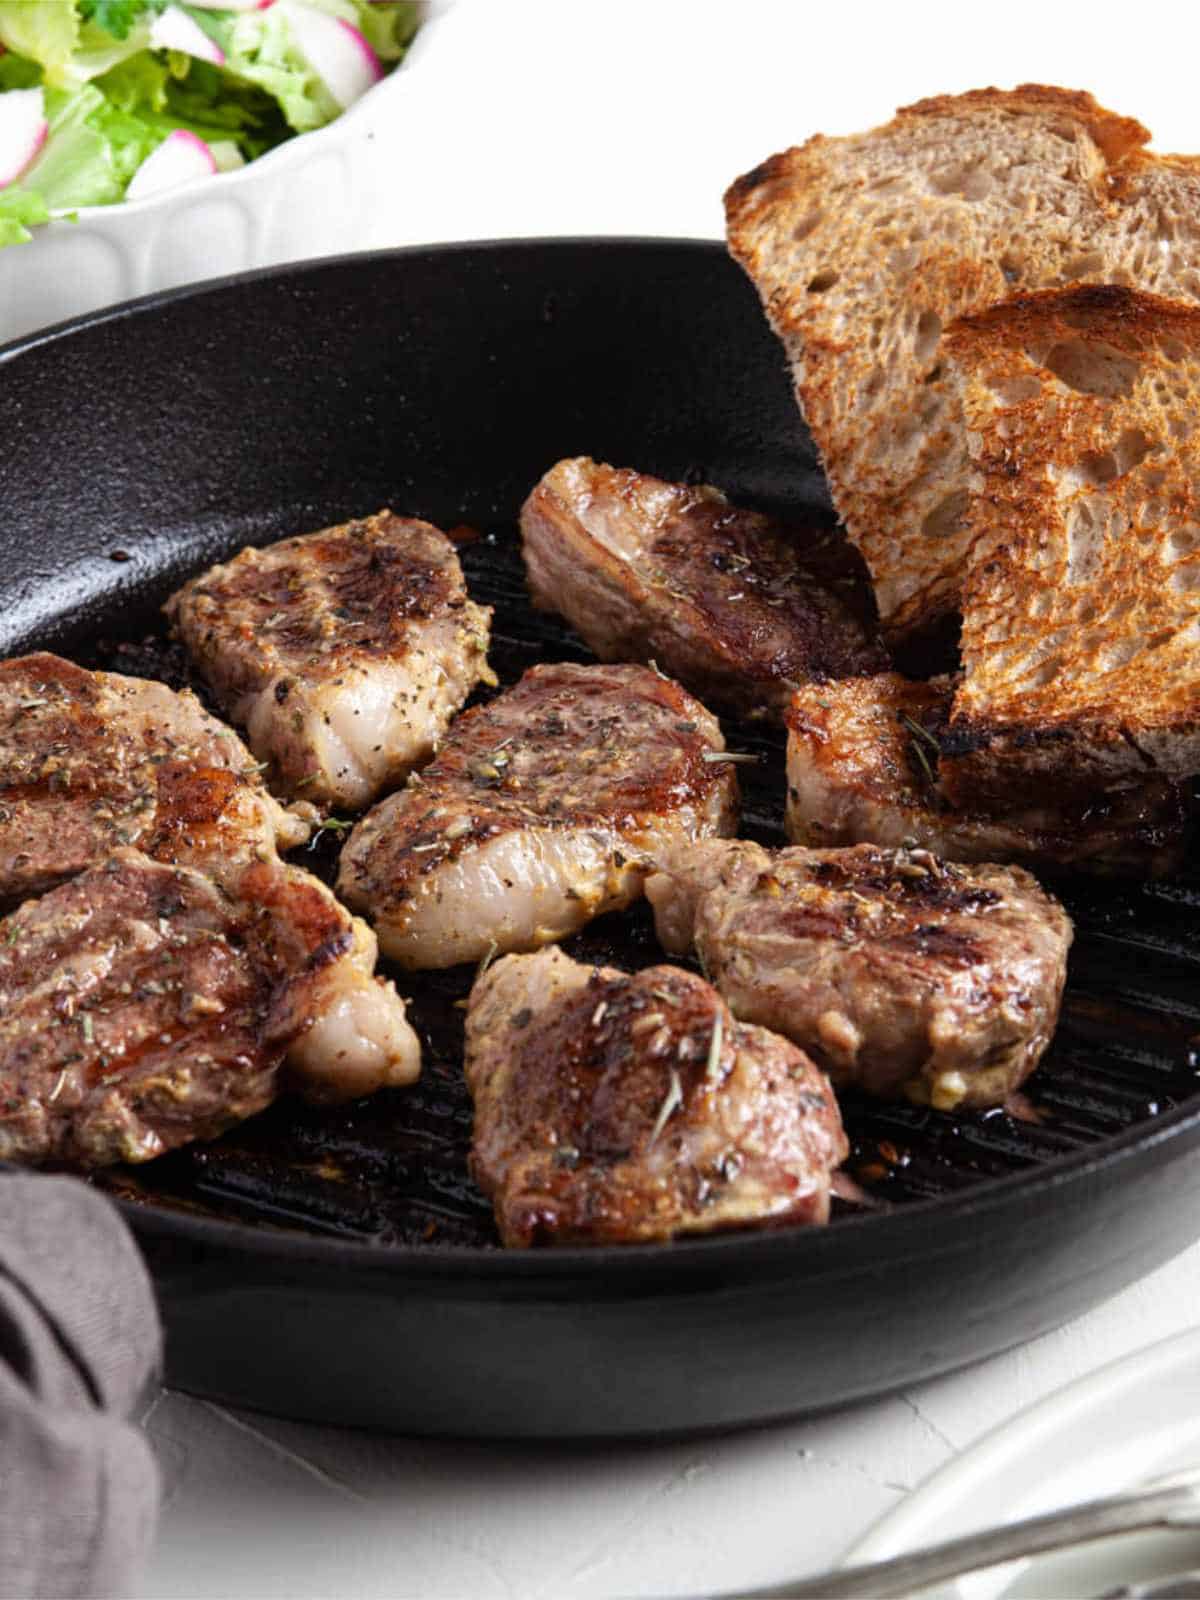 Pan seared lamb chops served in a cast iron skillet.